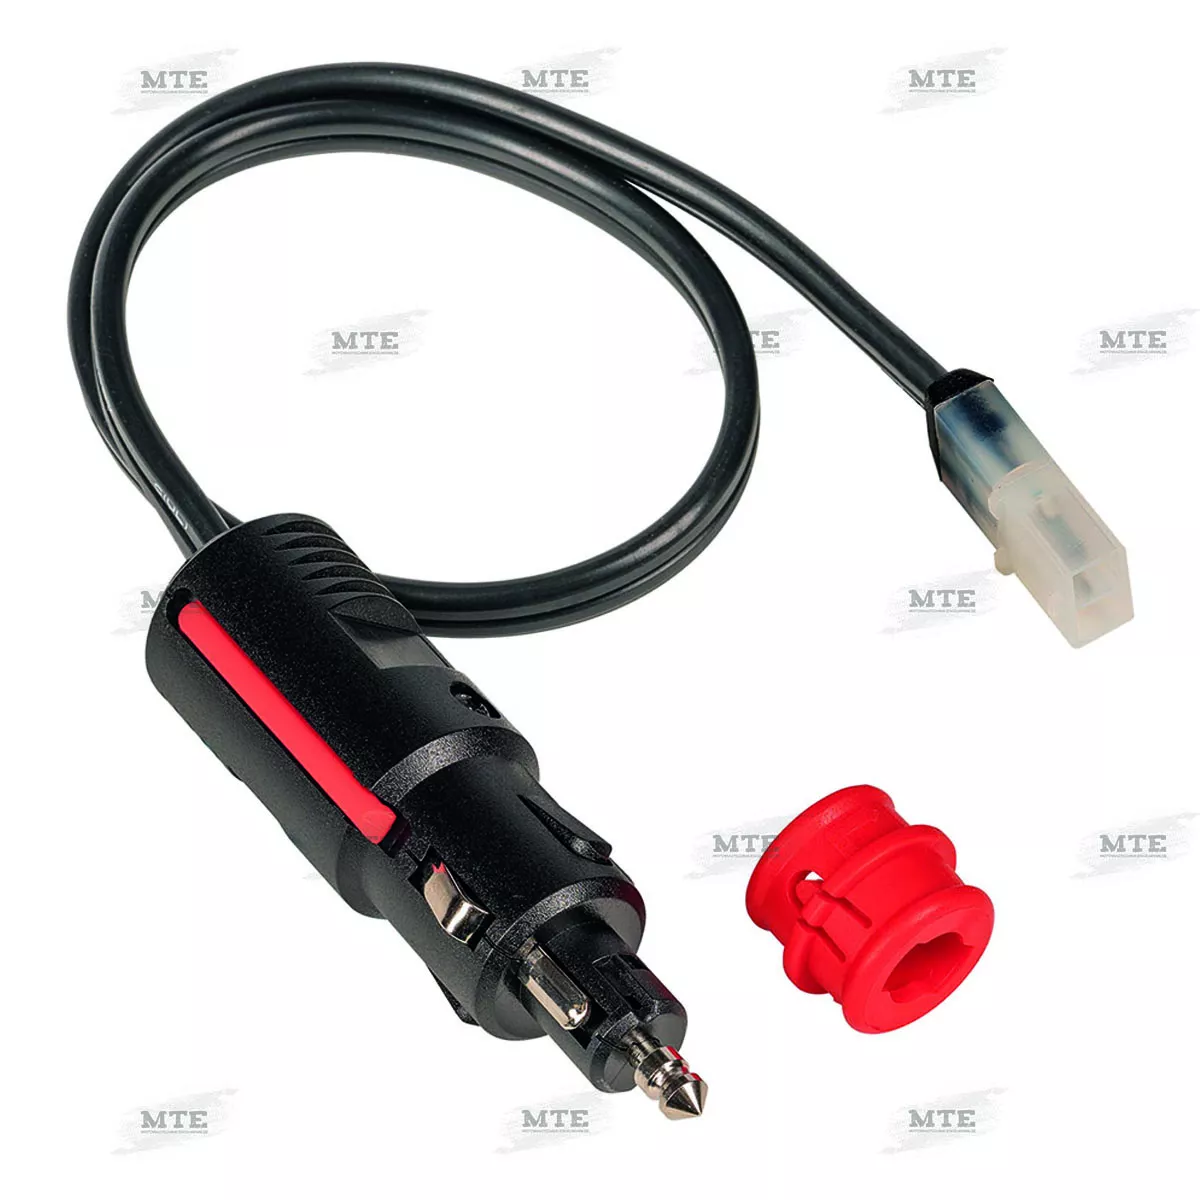 iTimo Universal-Zigarettenanzünder-Adapter mit roter LED-Anzeige